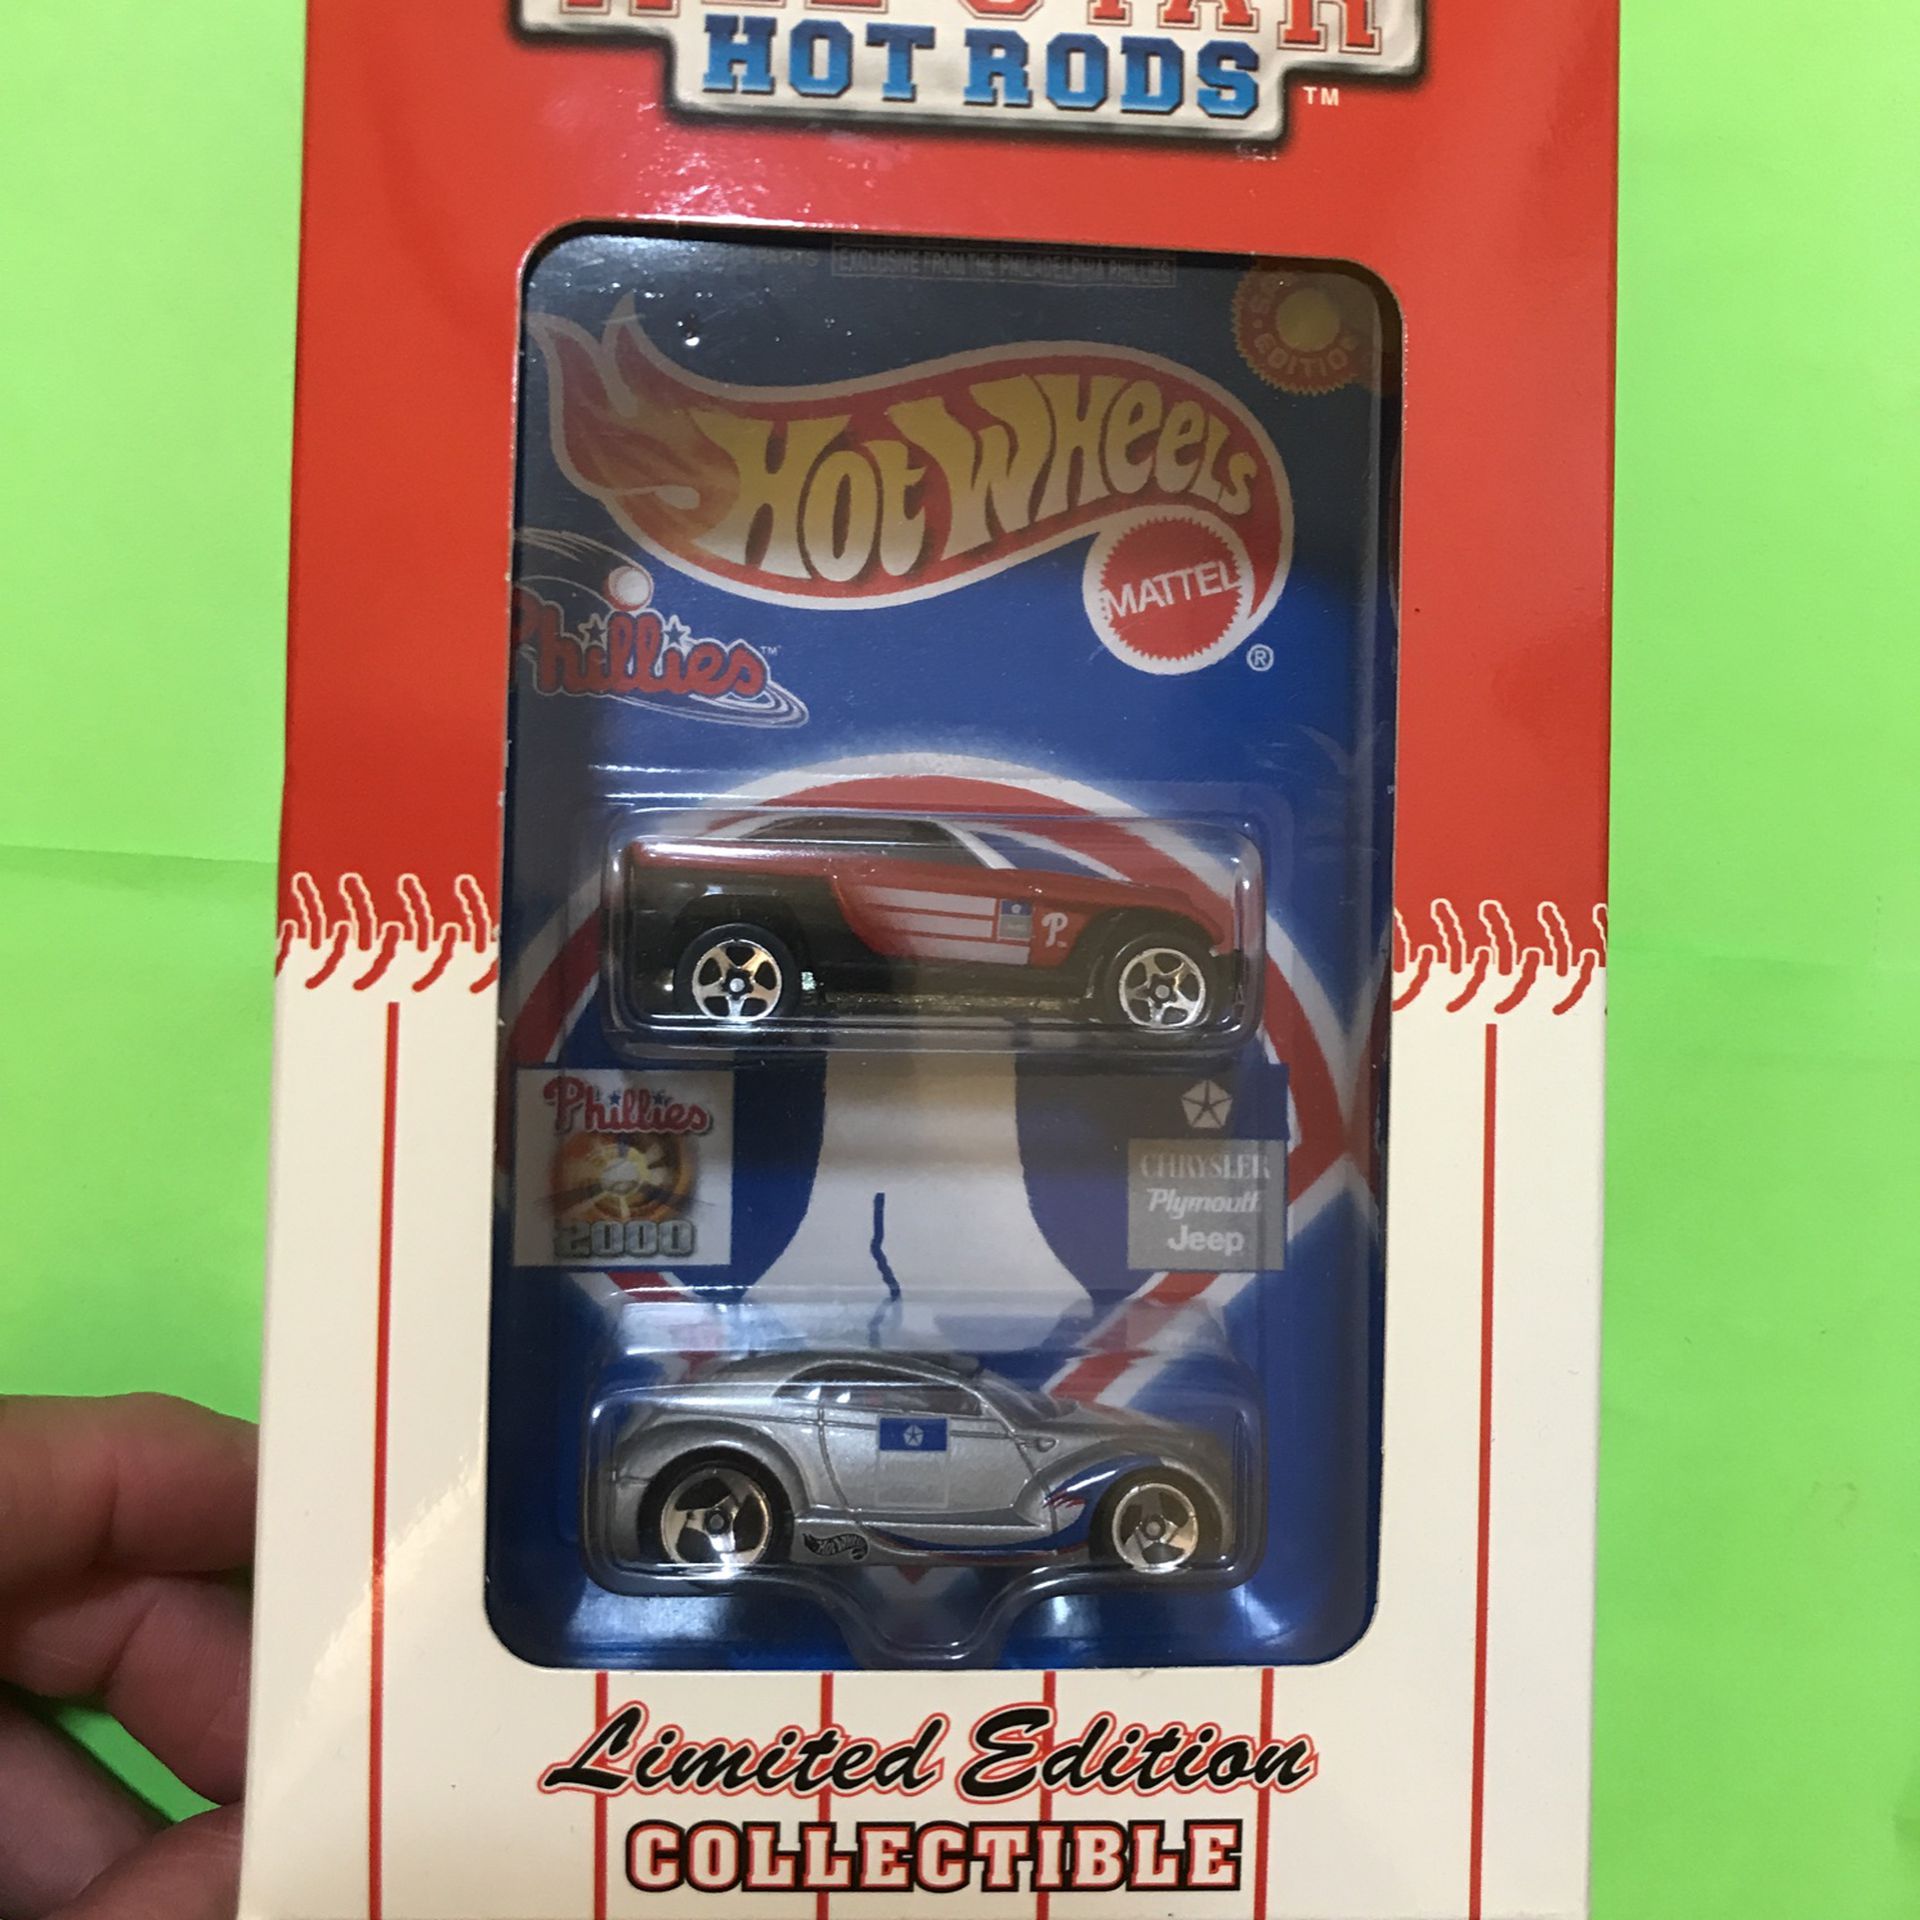 K-5 Hot wheels boxed all star hot rods Phillies $22